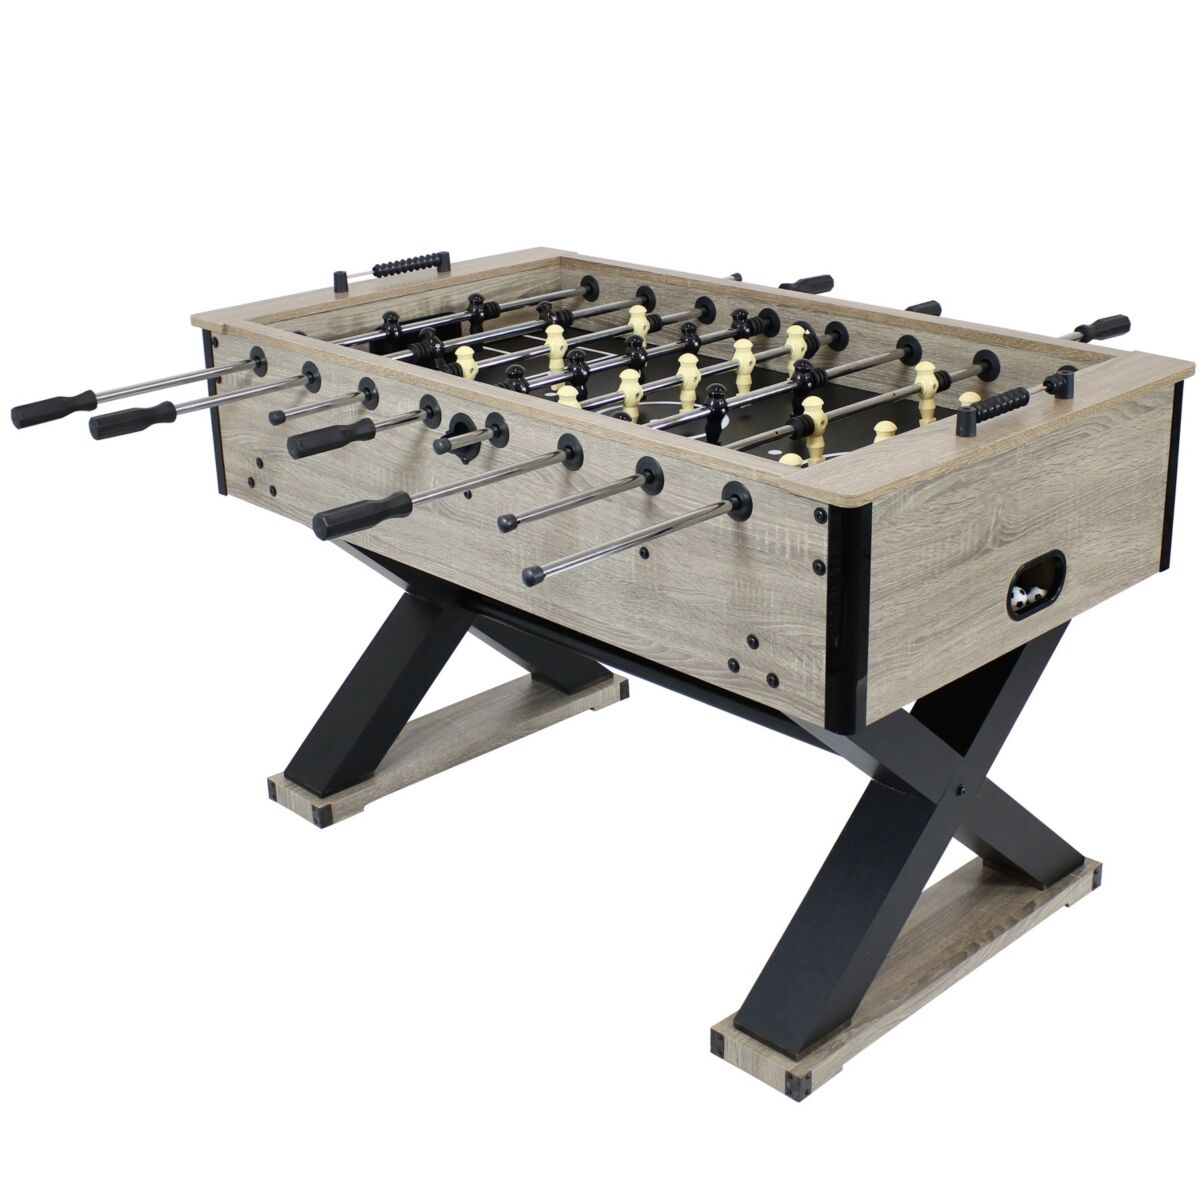 Sunnydaze Decor Delano 54.5 in Foosball Table with Distressed Wood Look - Grey